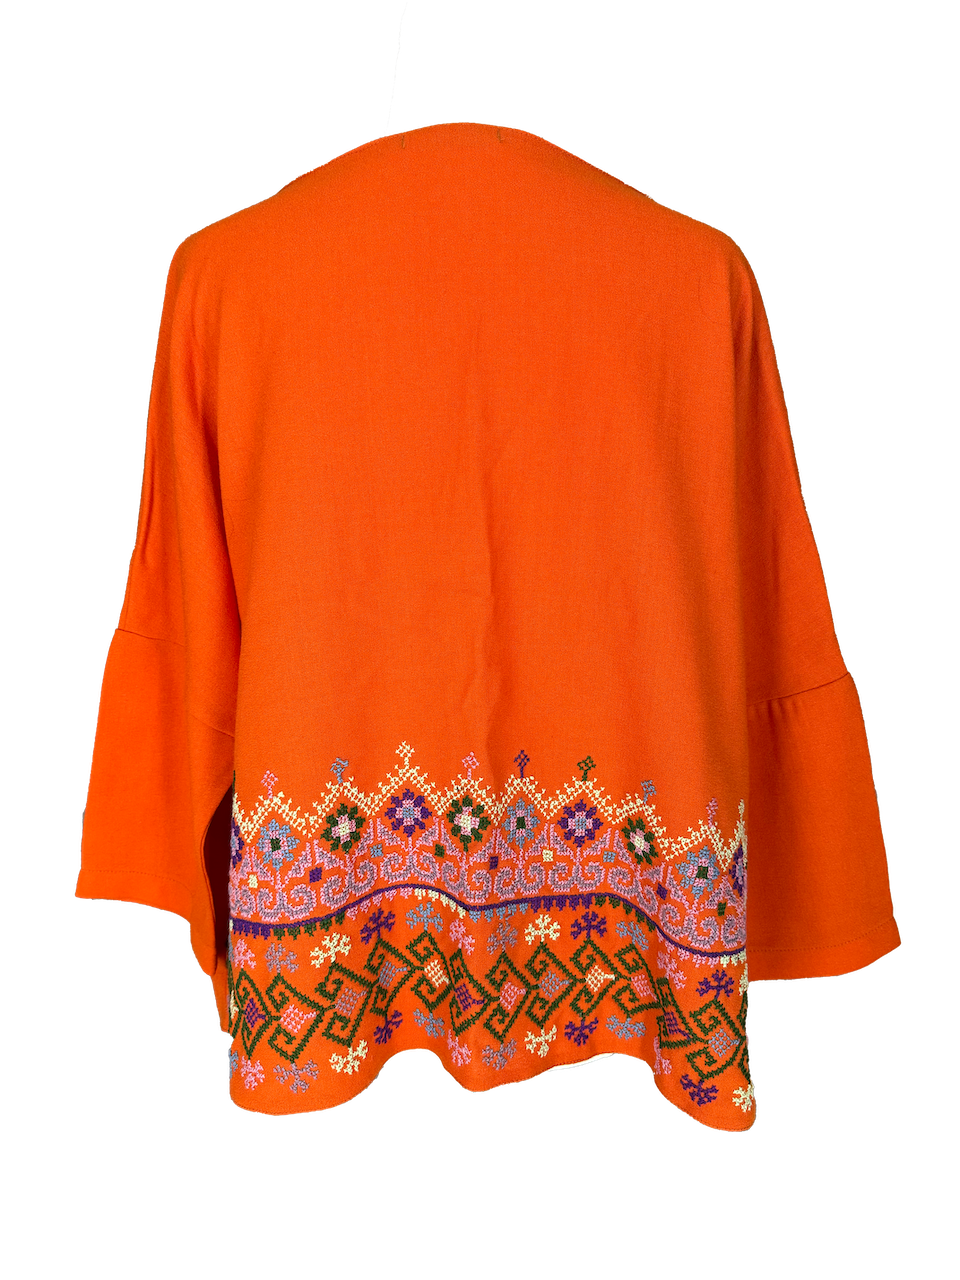 The Heavily Embroidered Boxy in Orange With Dark Green Multi Embroidery